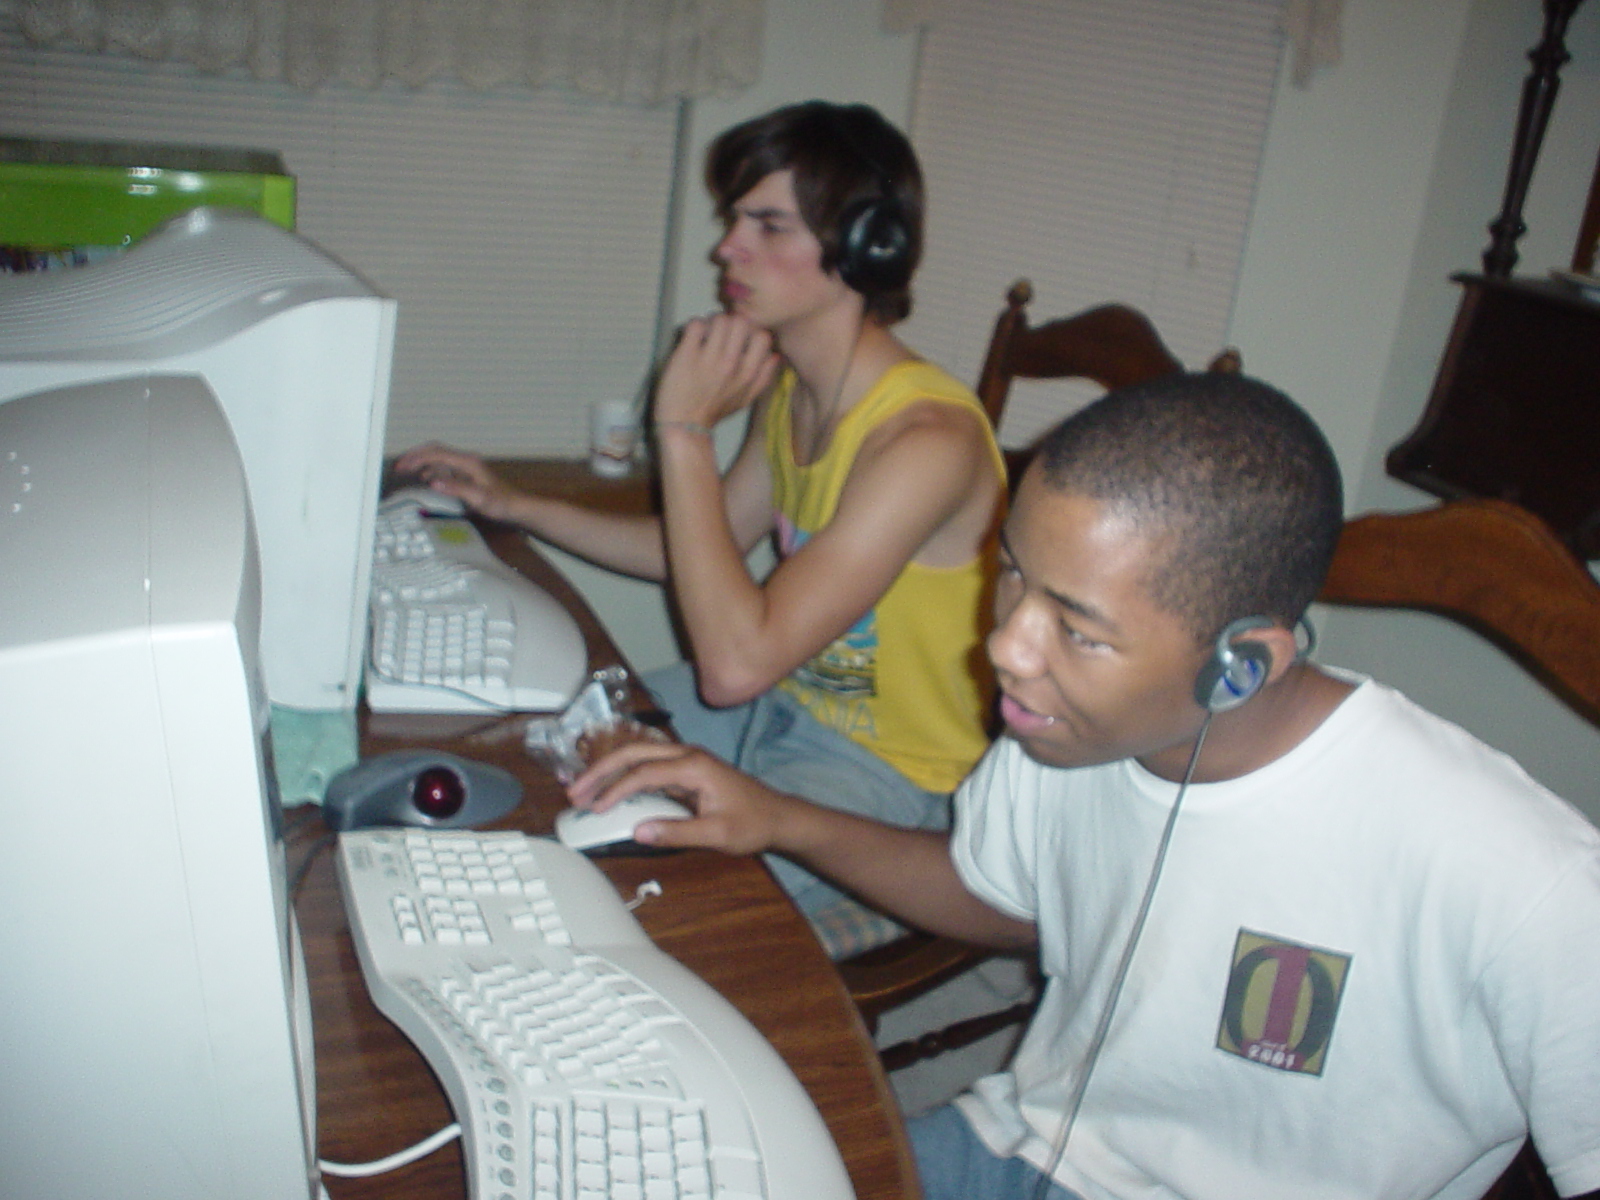 Two teenagers sit side-by-side, absorbed in games on unseen CRT monitor screens.